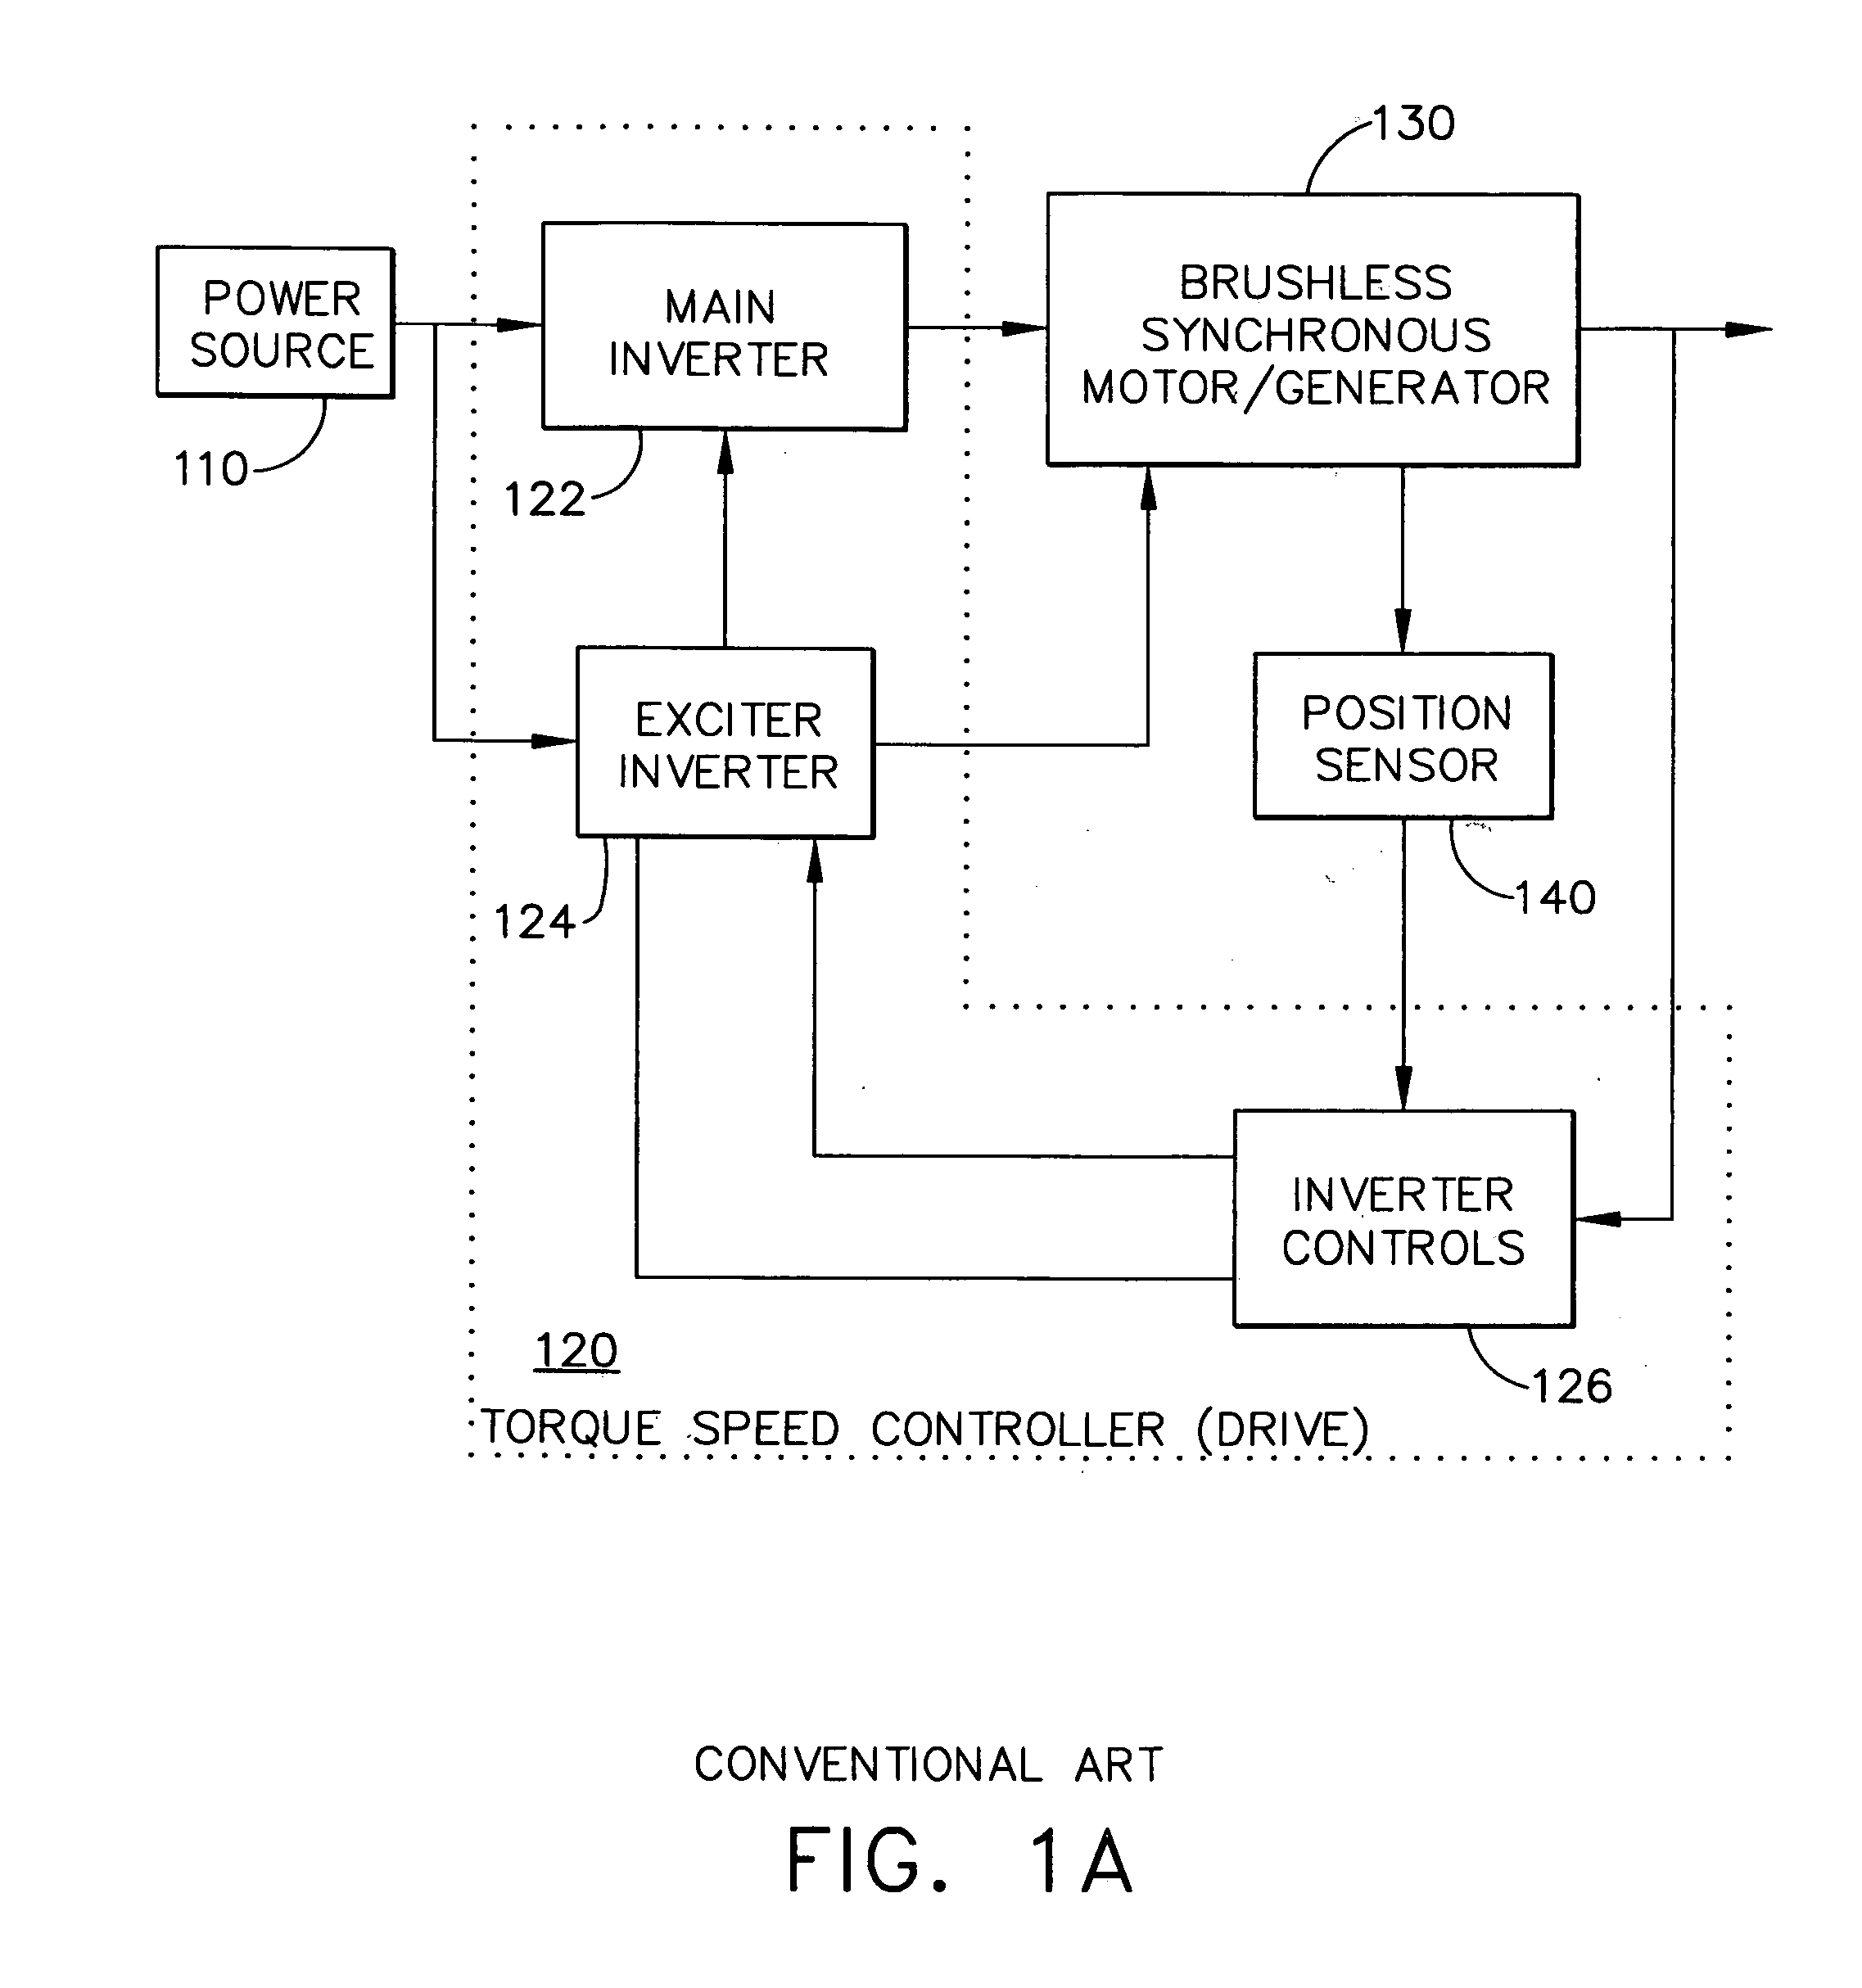 Position sensing method and apparatus for synchronous motor generator system